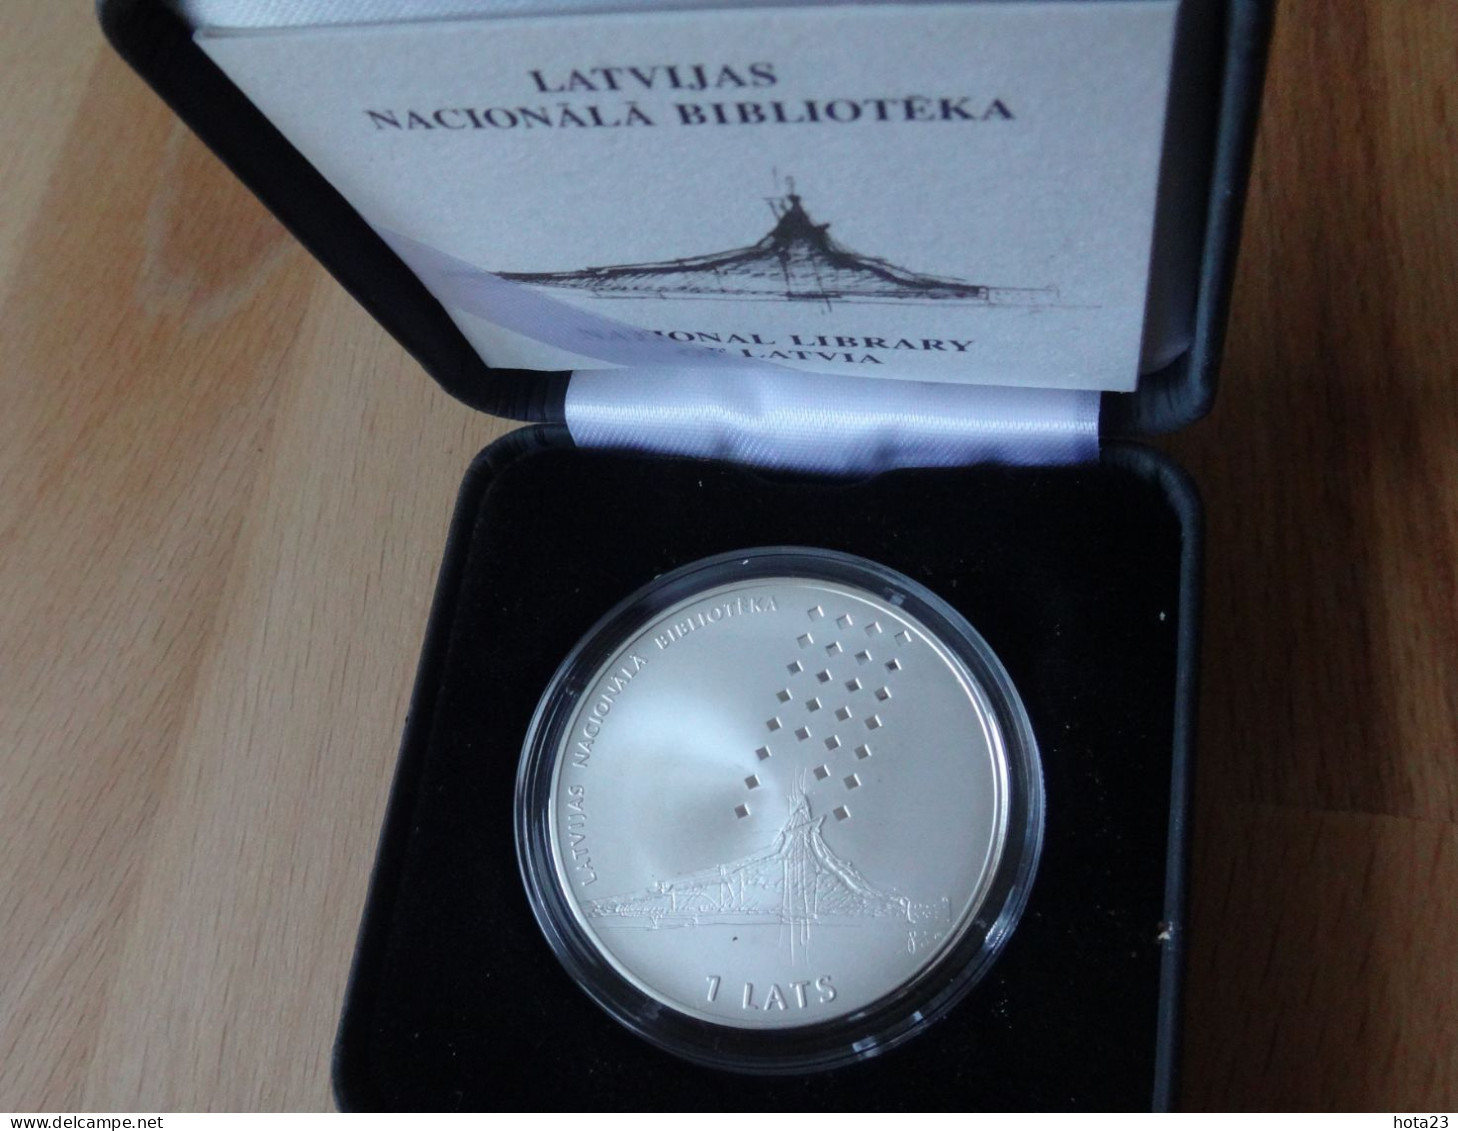 (!) LATVIA ,Lettland , Lettonia SILVER COIN 1 LATS National Library PROOF 2002 Y Modern Architekture - Letonia